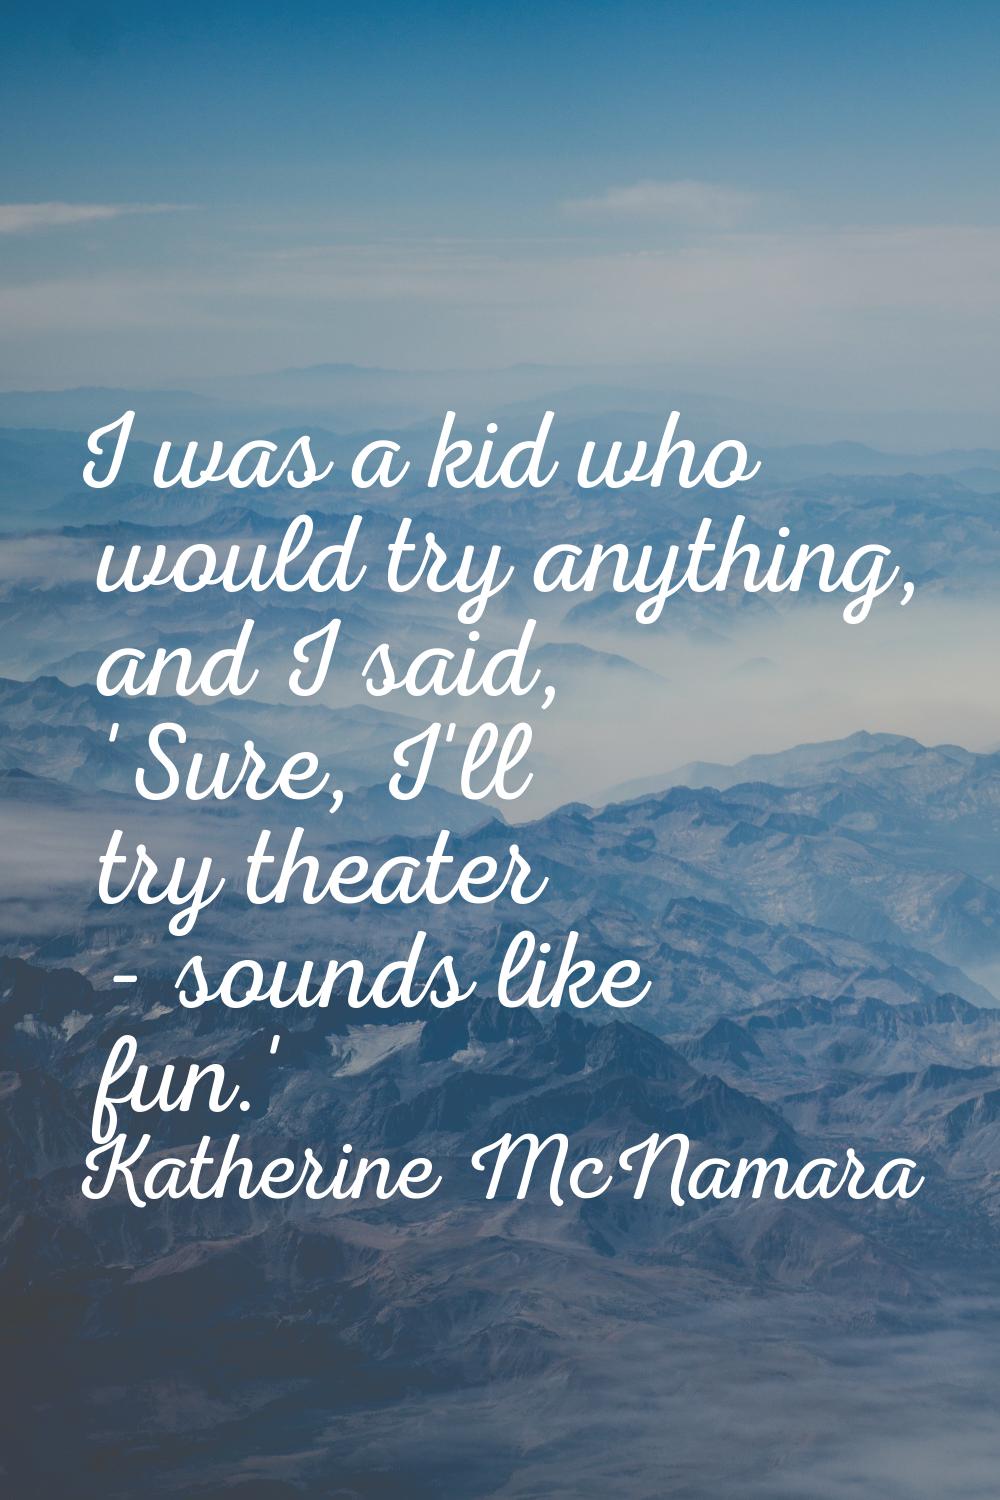 I was a kid who would try anything, and I said, 'Sure, I'll try theater - sounds like fun.'